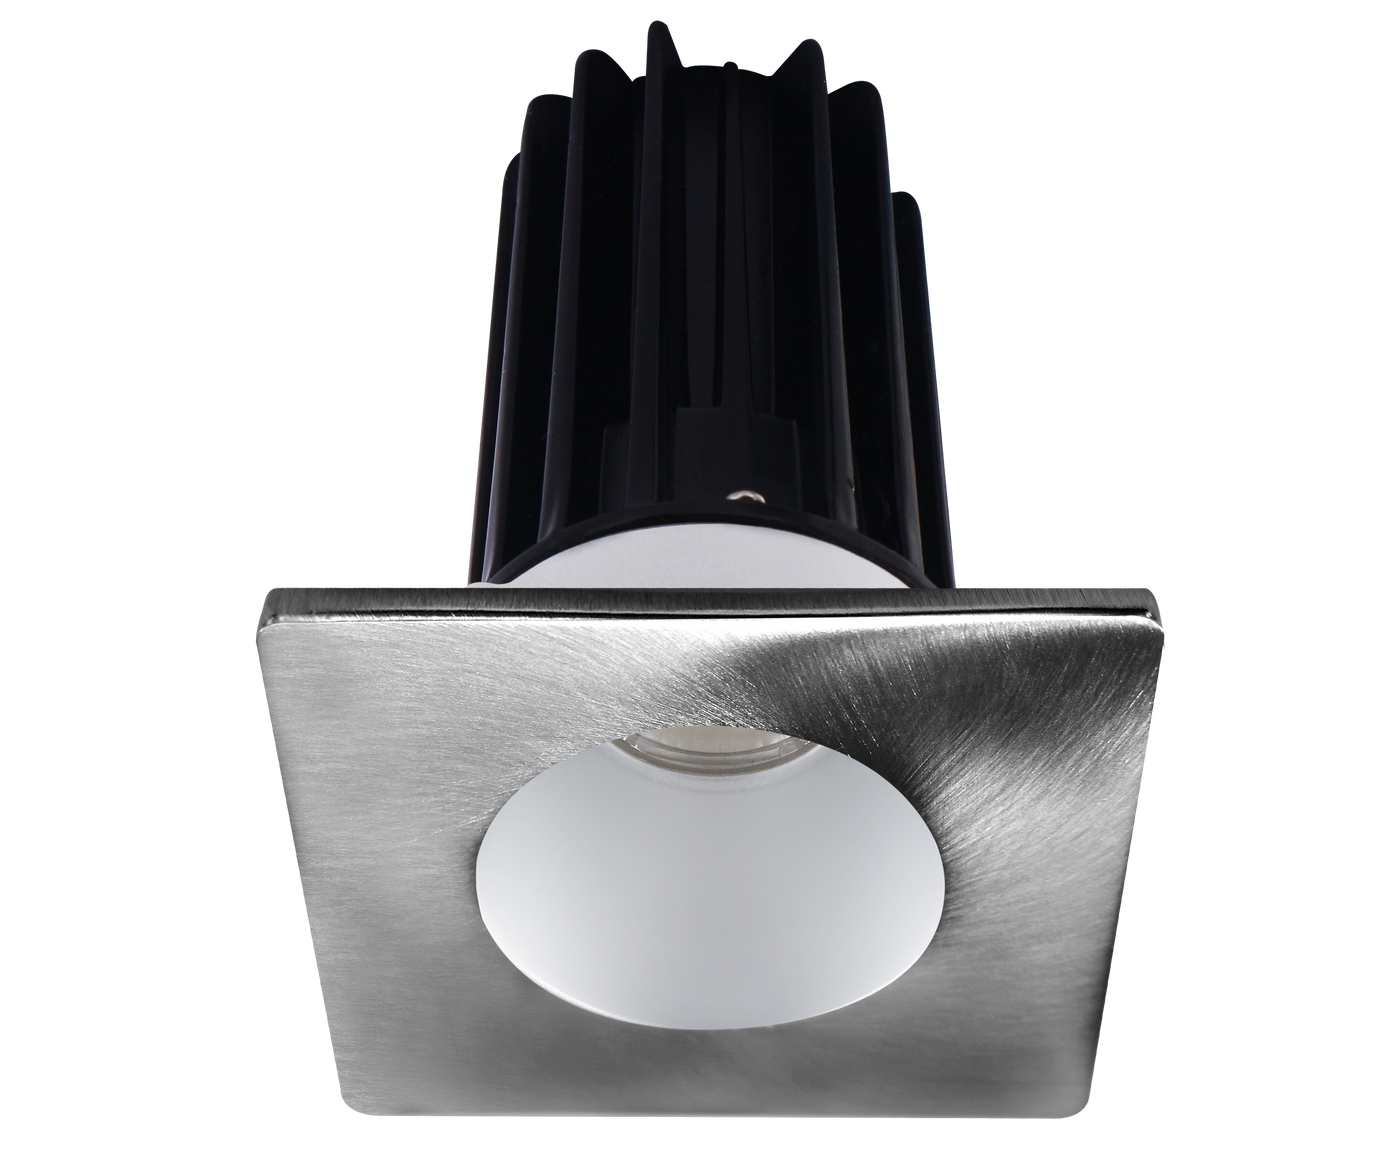 2" Recessed LED, 8W, 2700K/3000K/4000K, Multiple Reflectors and Square Trims